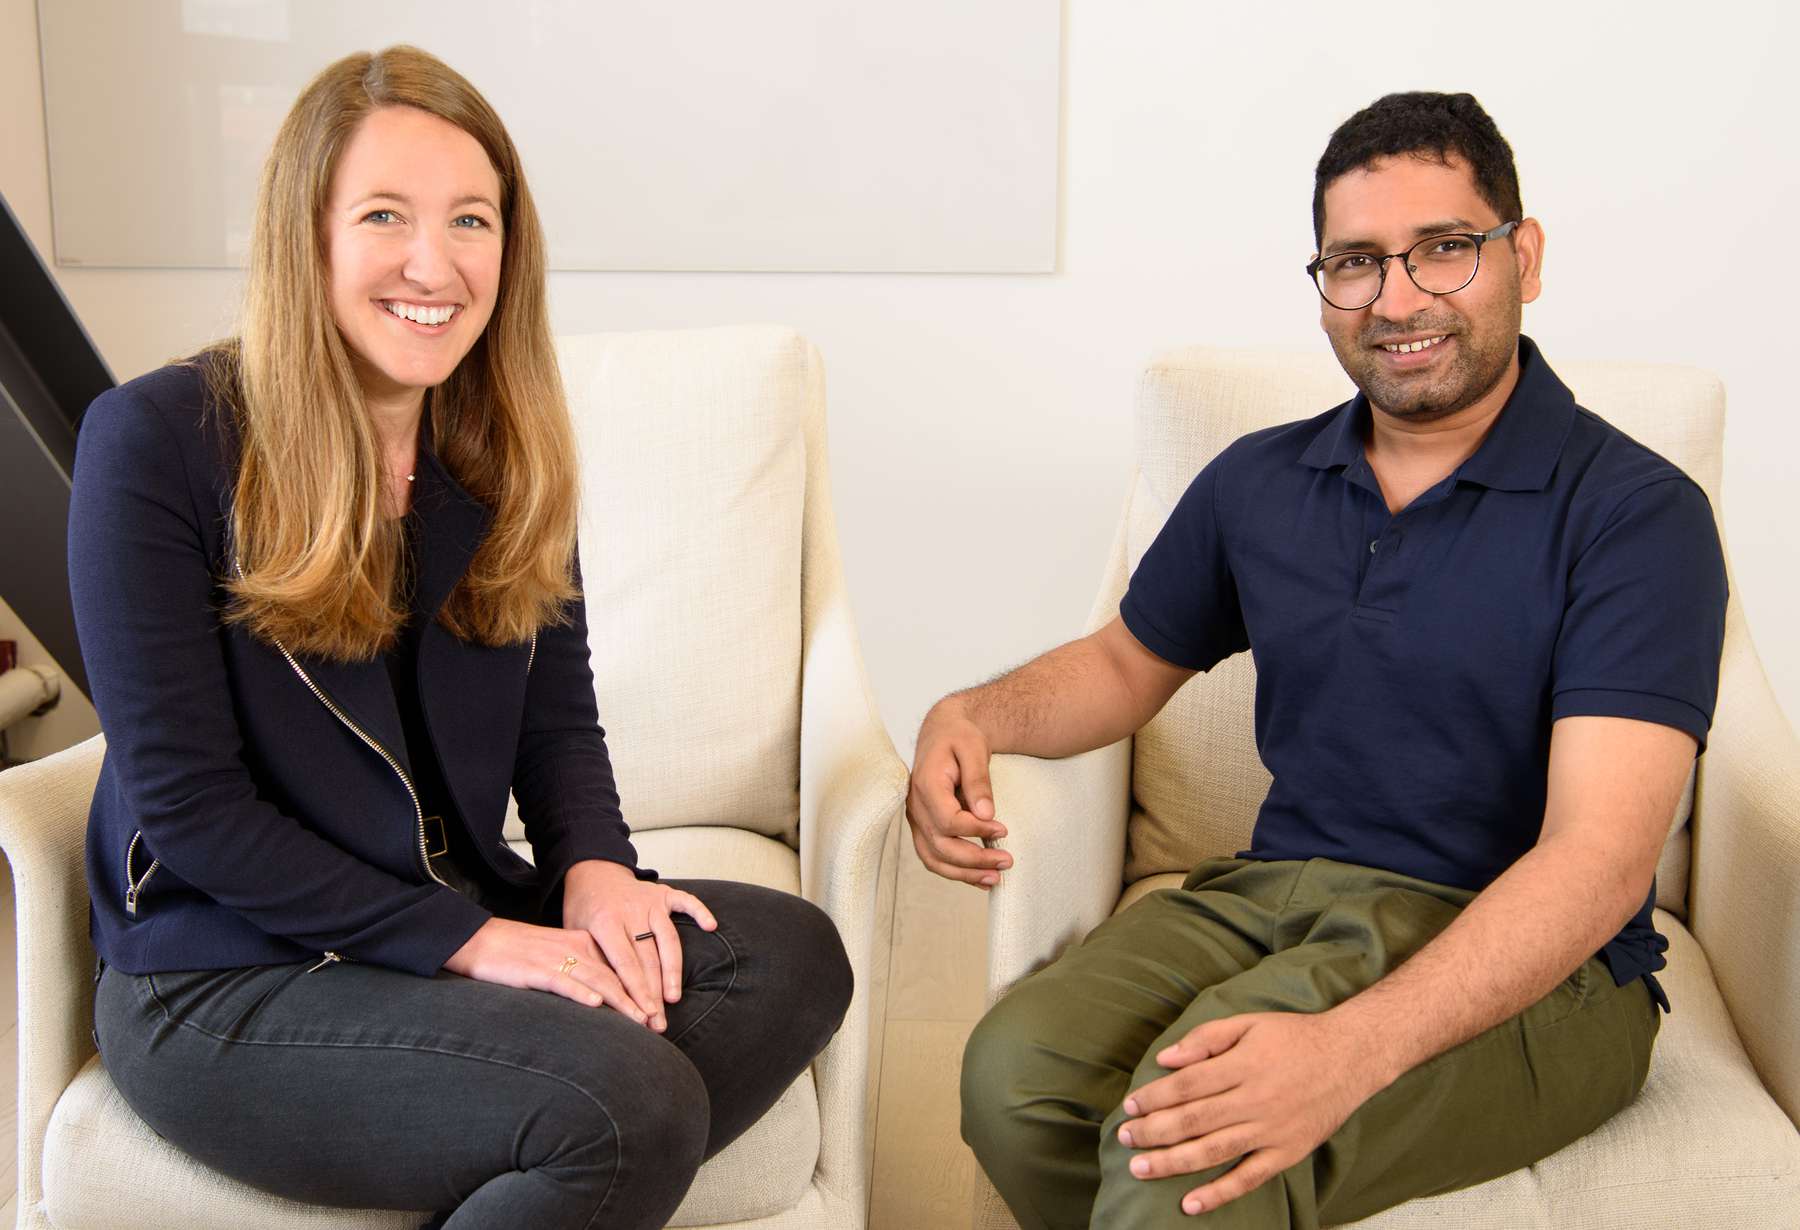 Sarah Cannon of Index Ventures with Anant Bhardwaj of Instabase